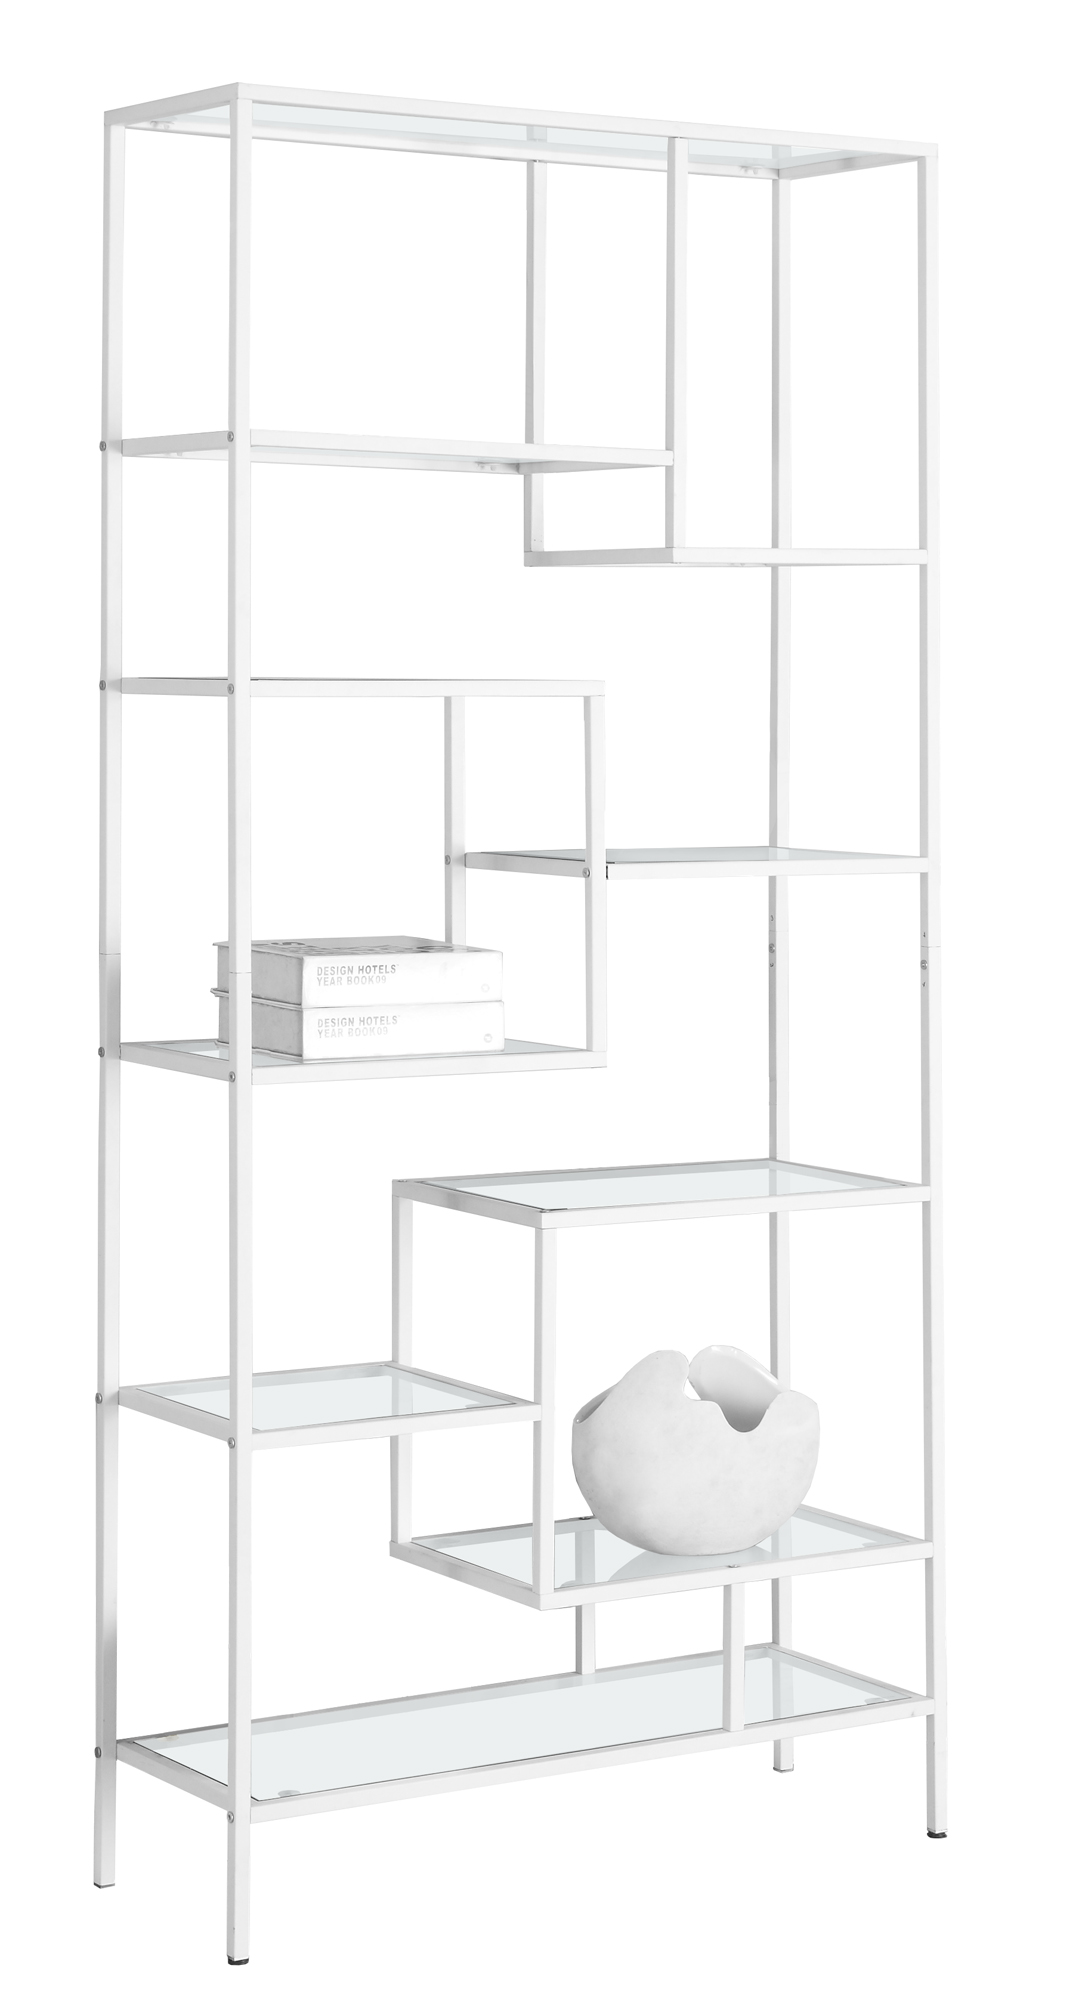 12" x 32" x 72" White  Clear  Tempered Glass  Metal   Bookcase